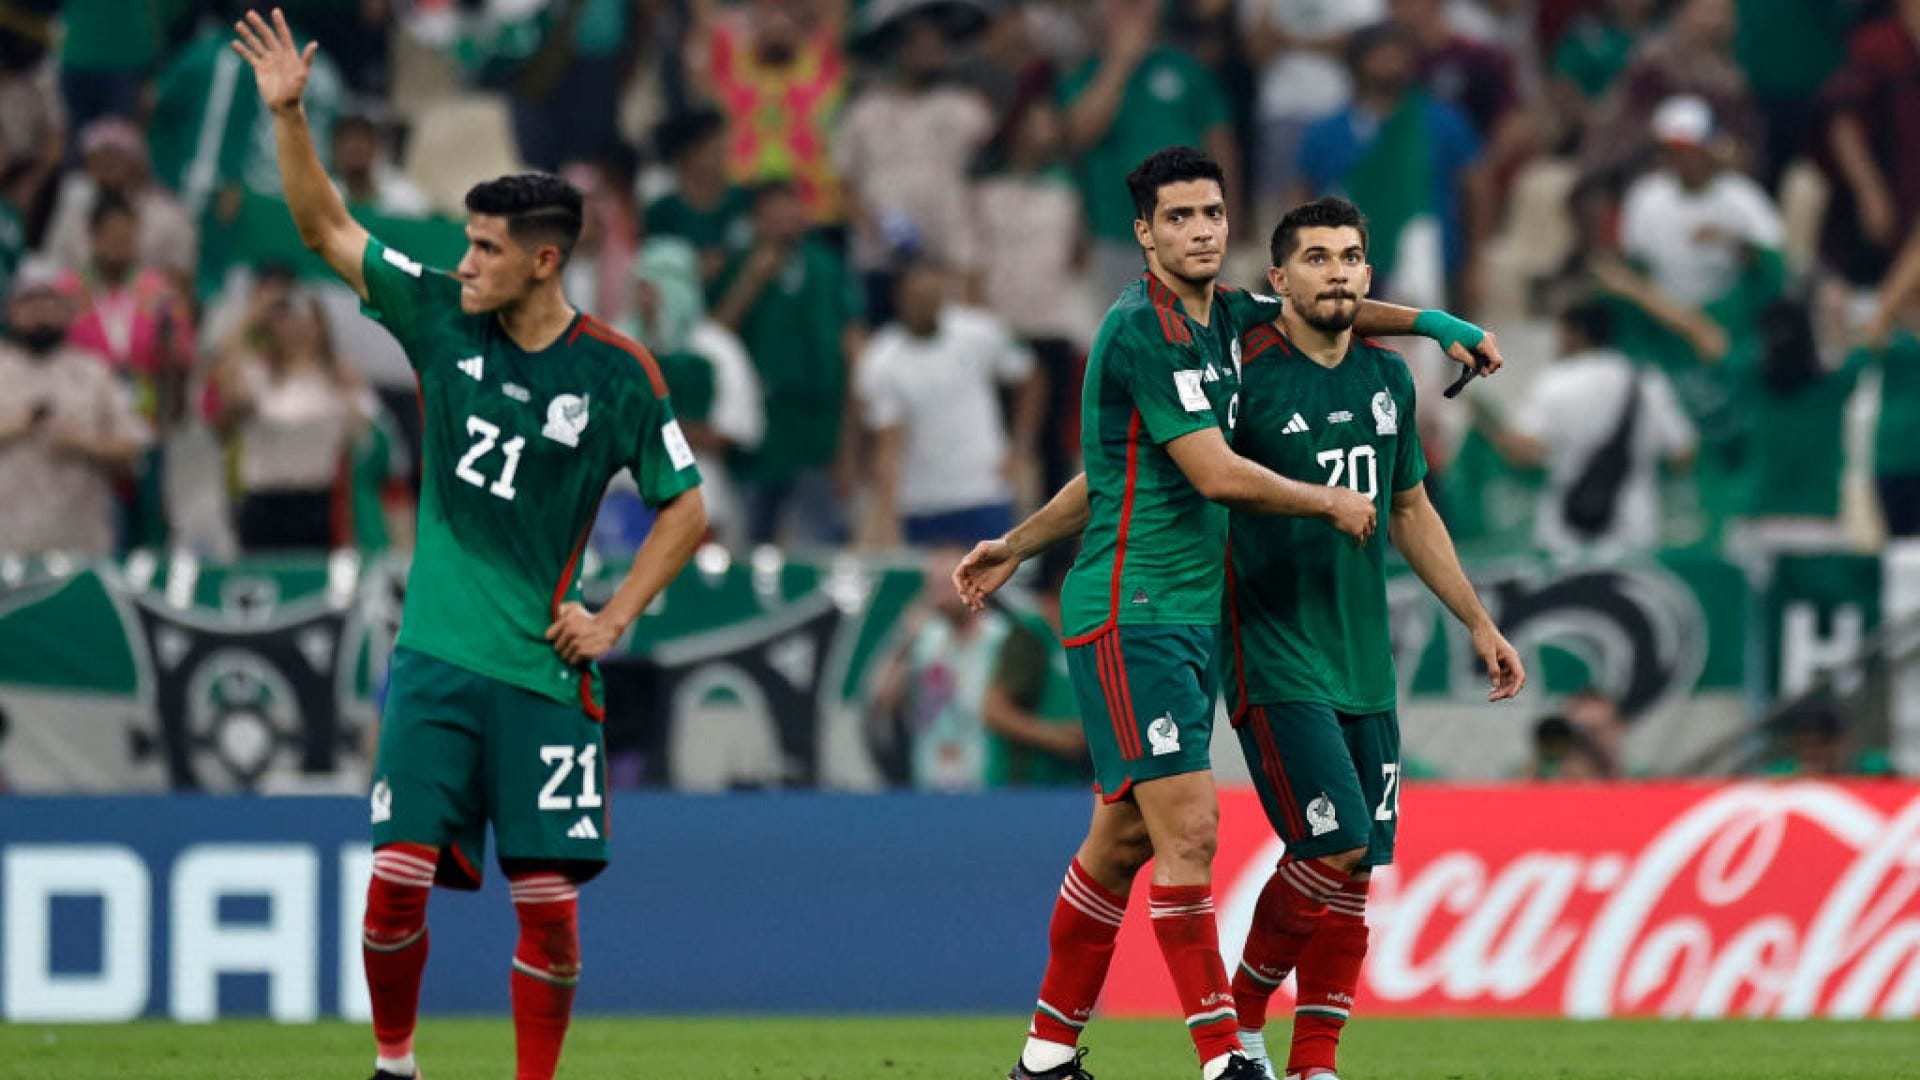 Watch LIVE ONLINE Suriname vs. Mexico, by the Concacaf Nations League